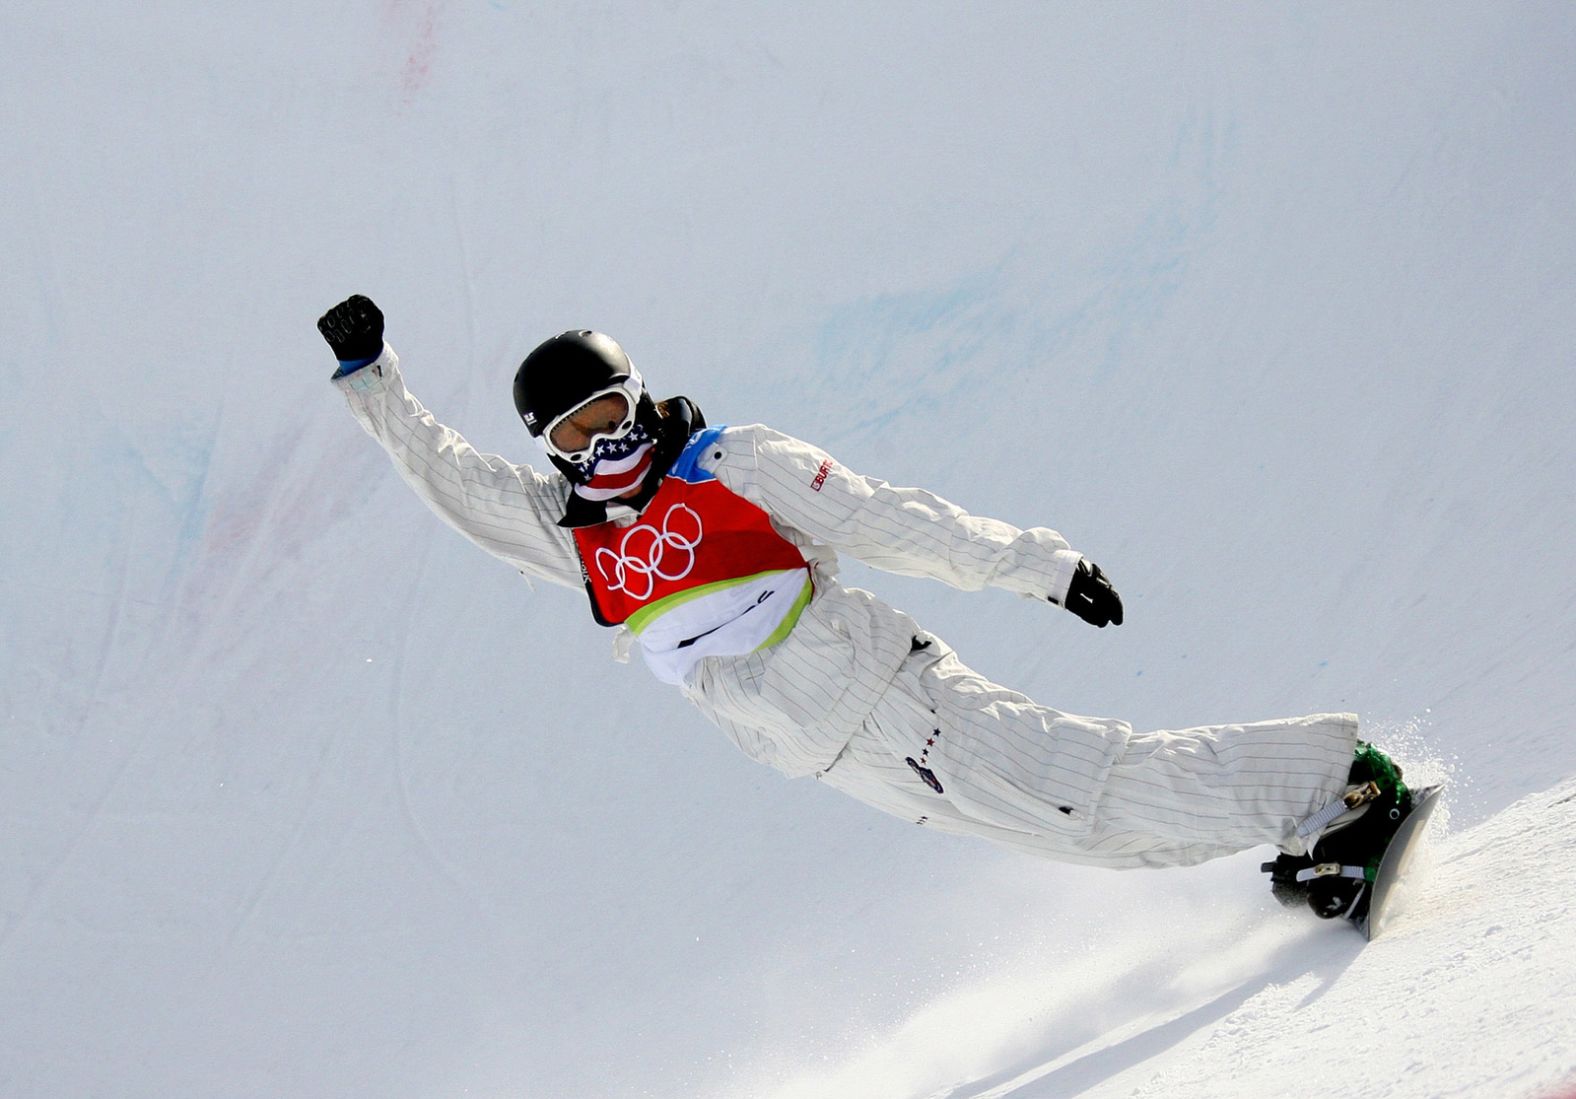 White celebrates after winning the halfpipe event at the 2006 Winter Olympics in Italy. It was his first Olympic gold.